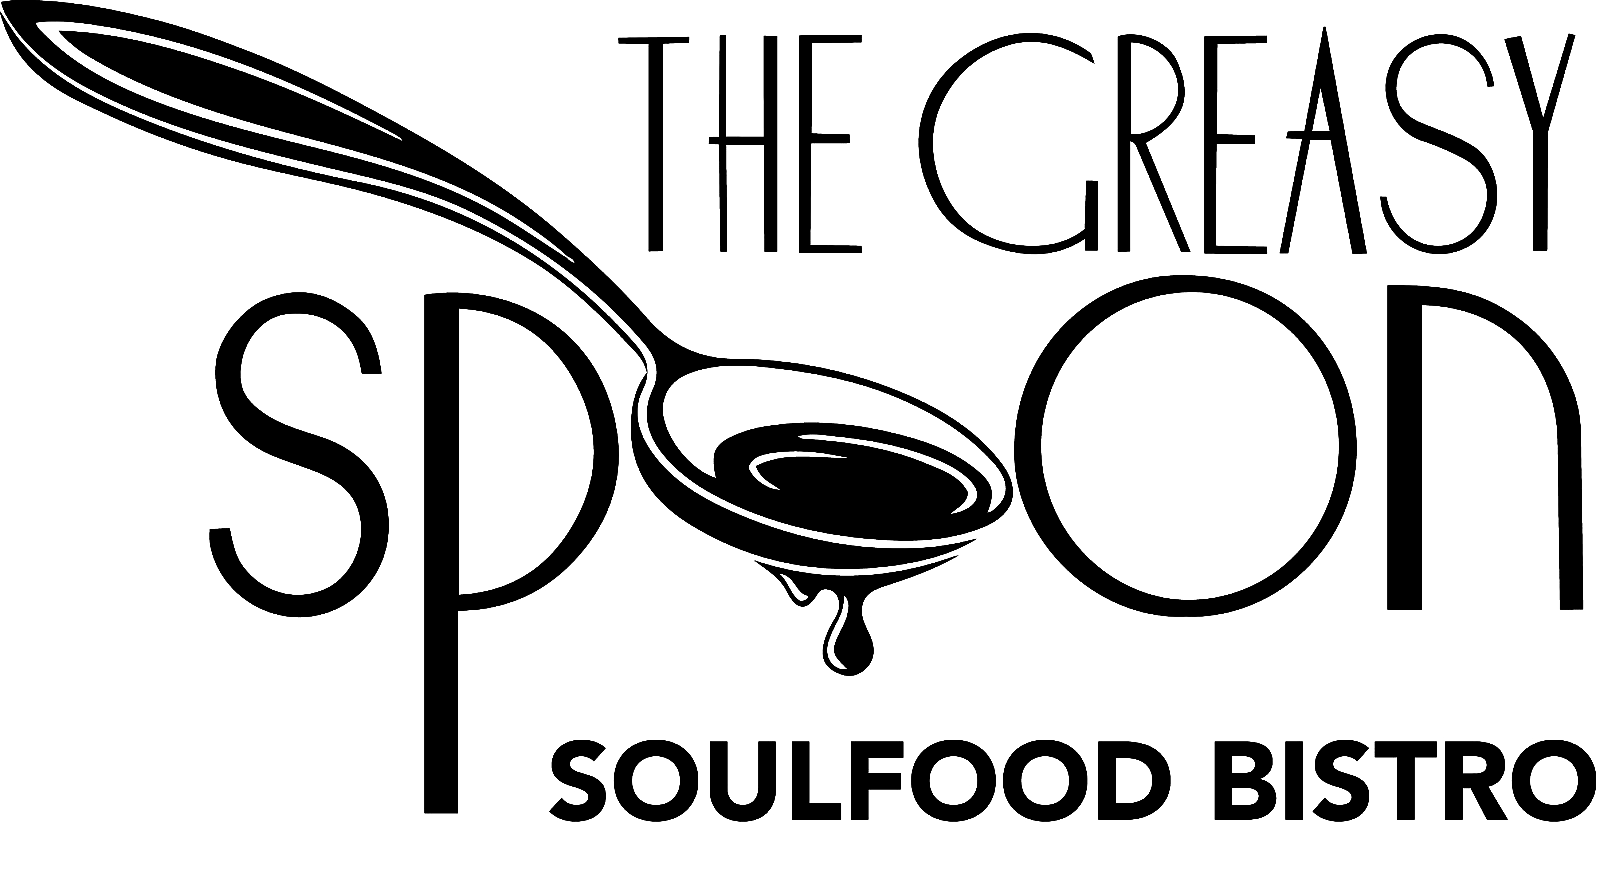 The Greasy Spoon Soulfood Bistro | Houston TX